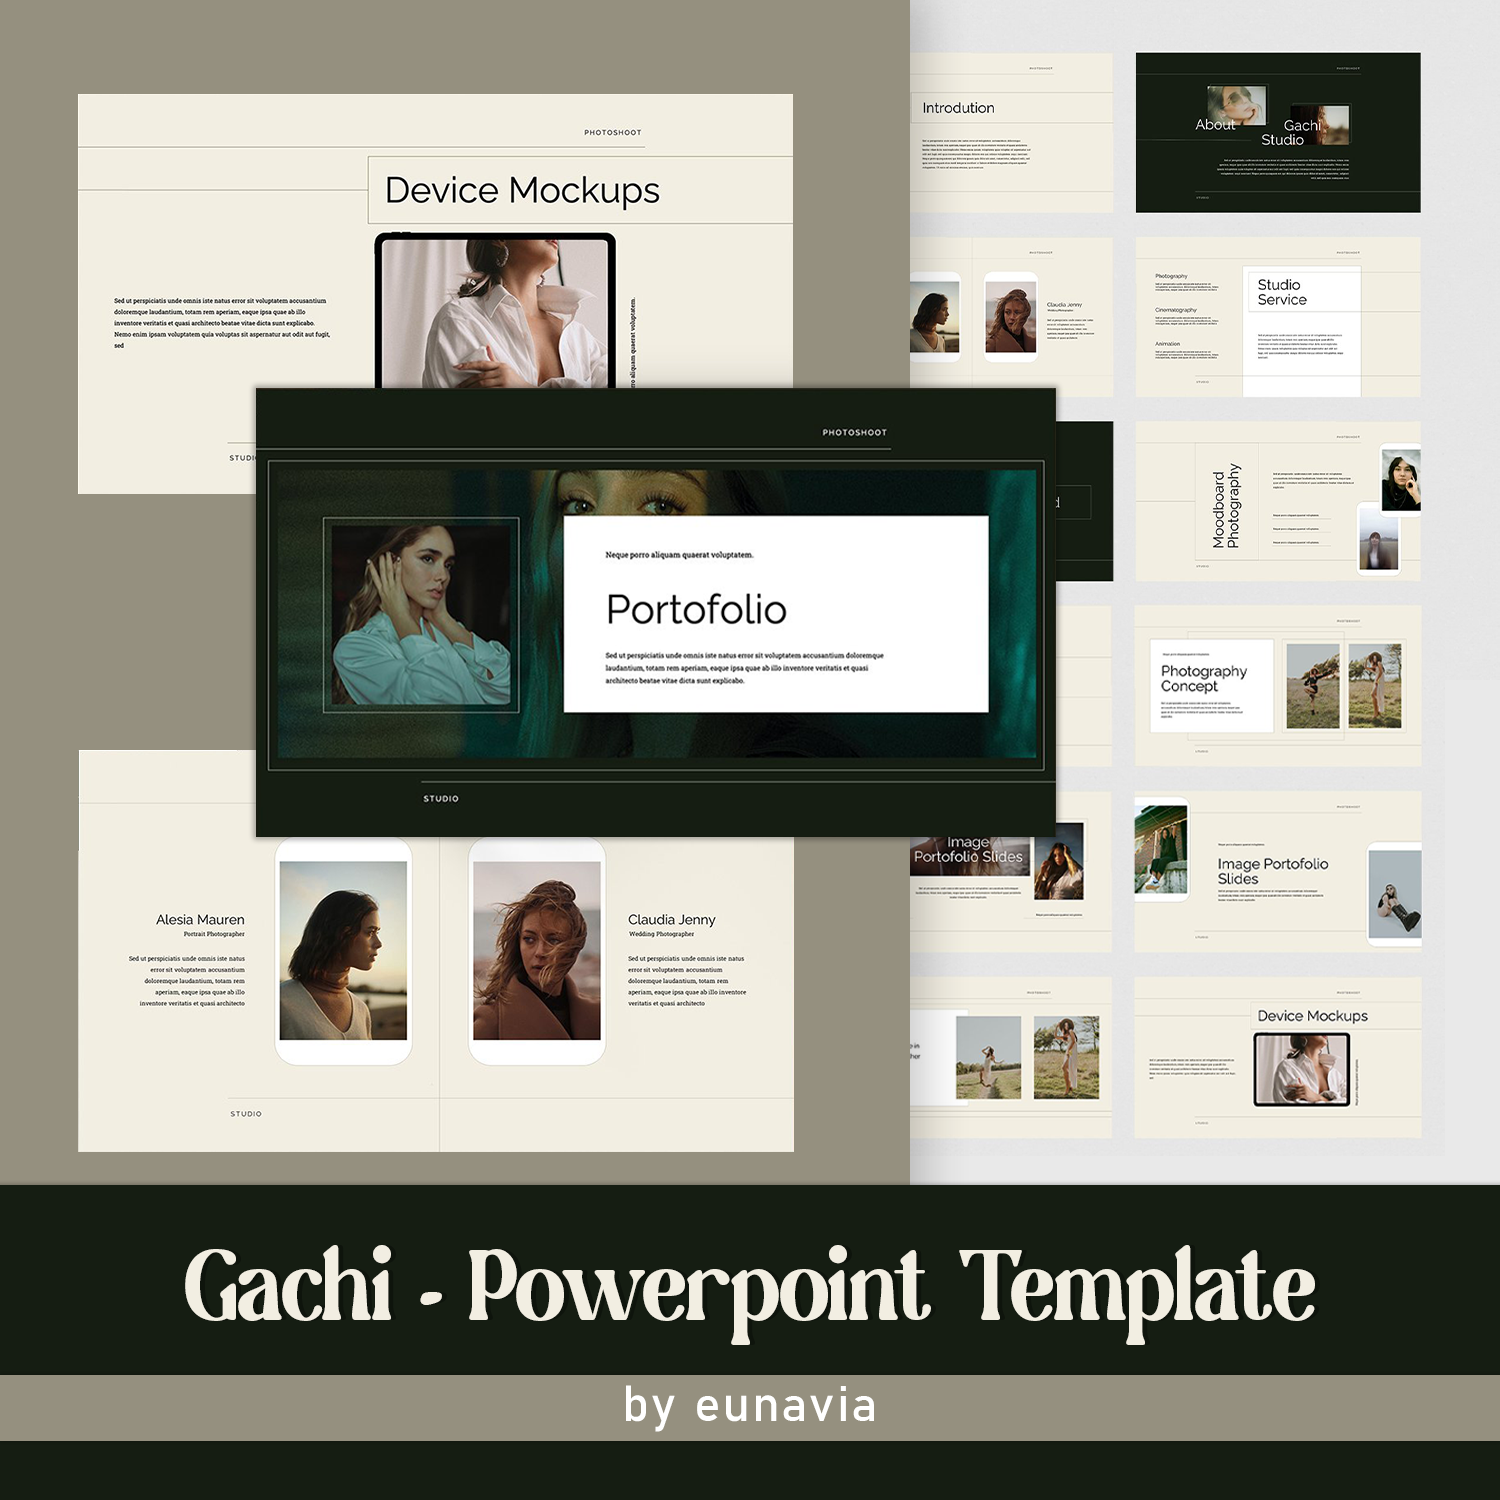 Prints of gachi powerpoint template.